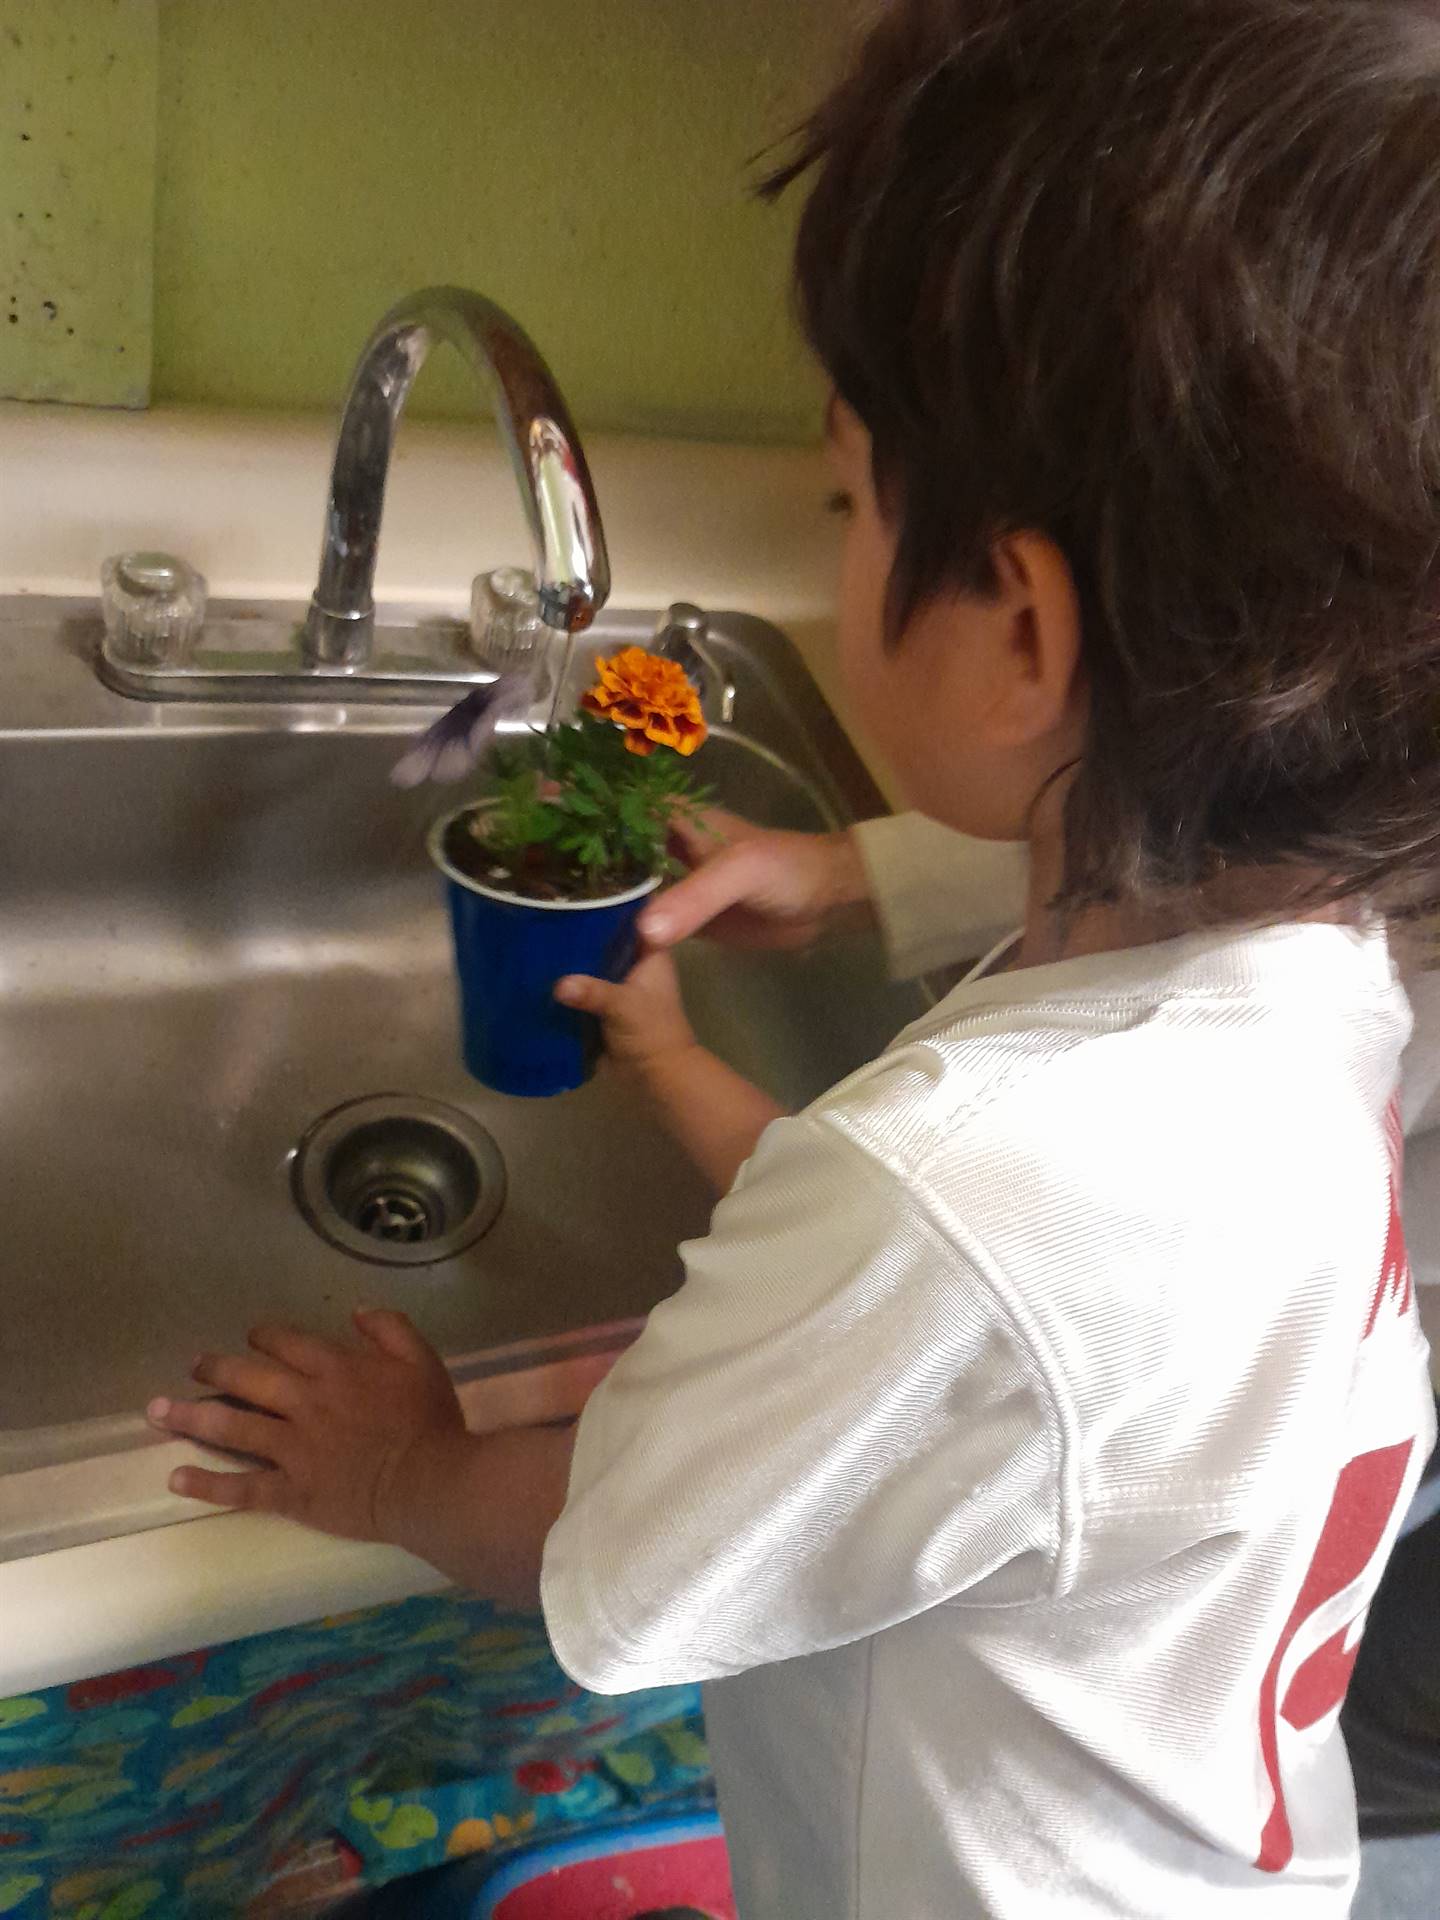 a student is watering a plant under a faucet